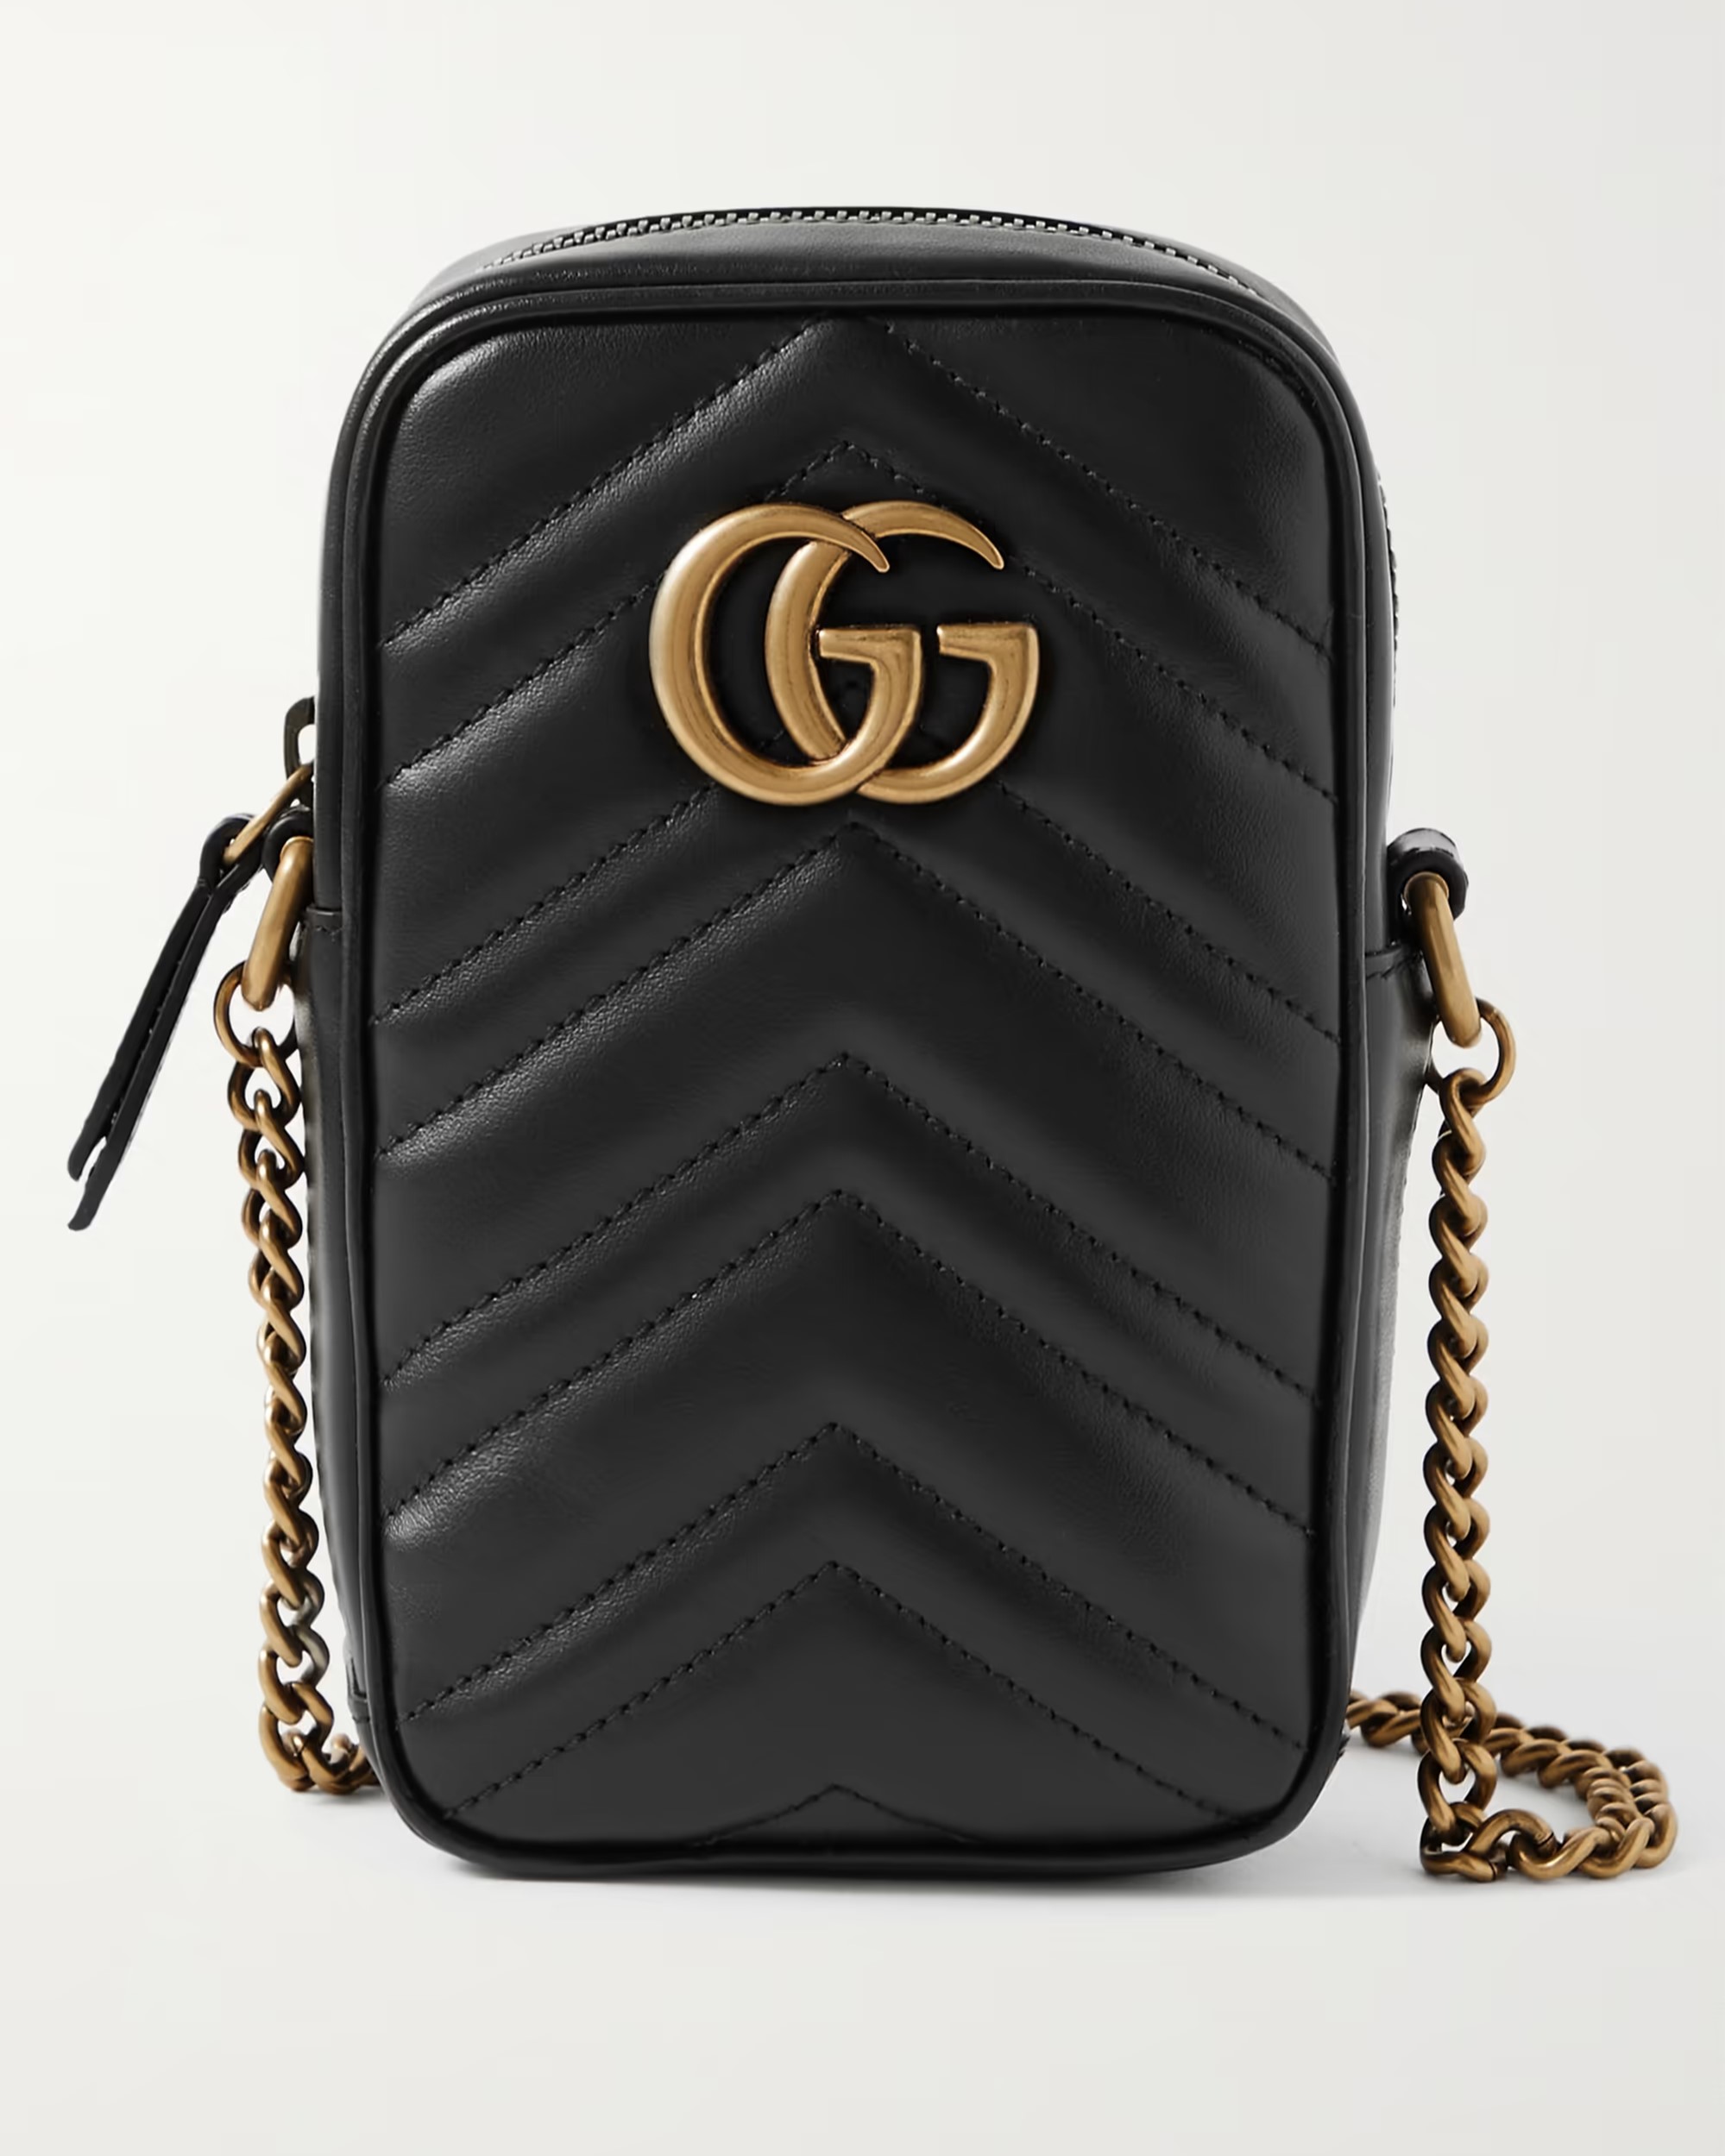 TÚI ĐEO ĐIỆN THOẠI GUCCI GG MARMONT MINI BLACK QUILTED LEATHER POUCH 1